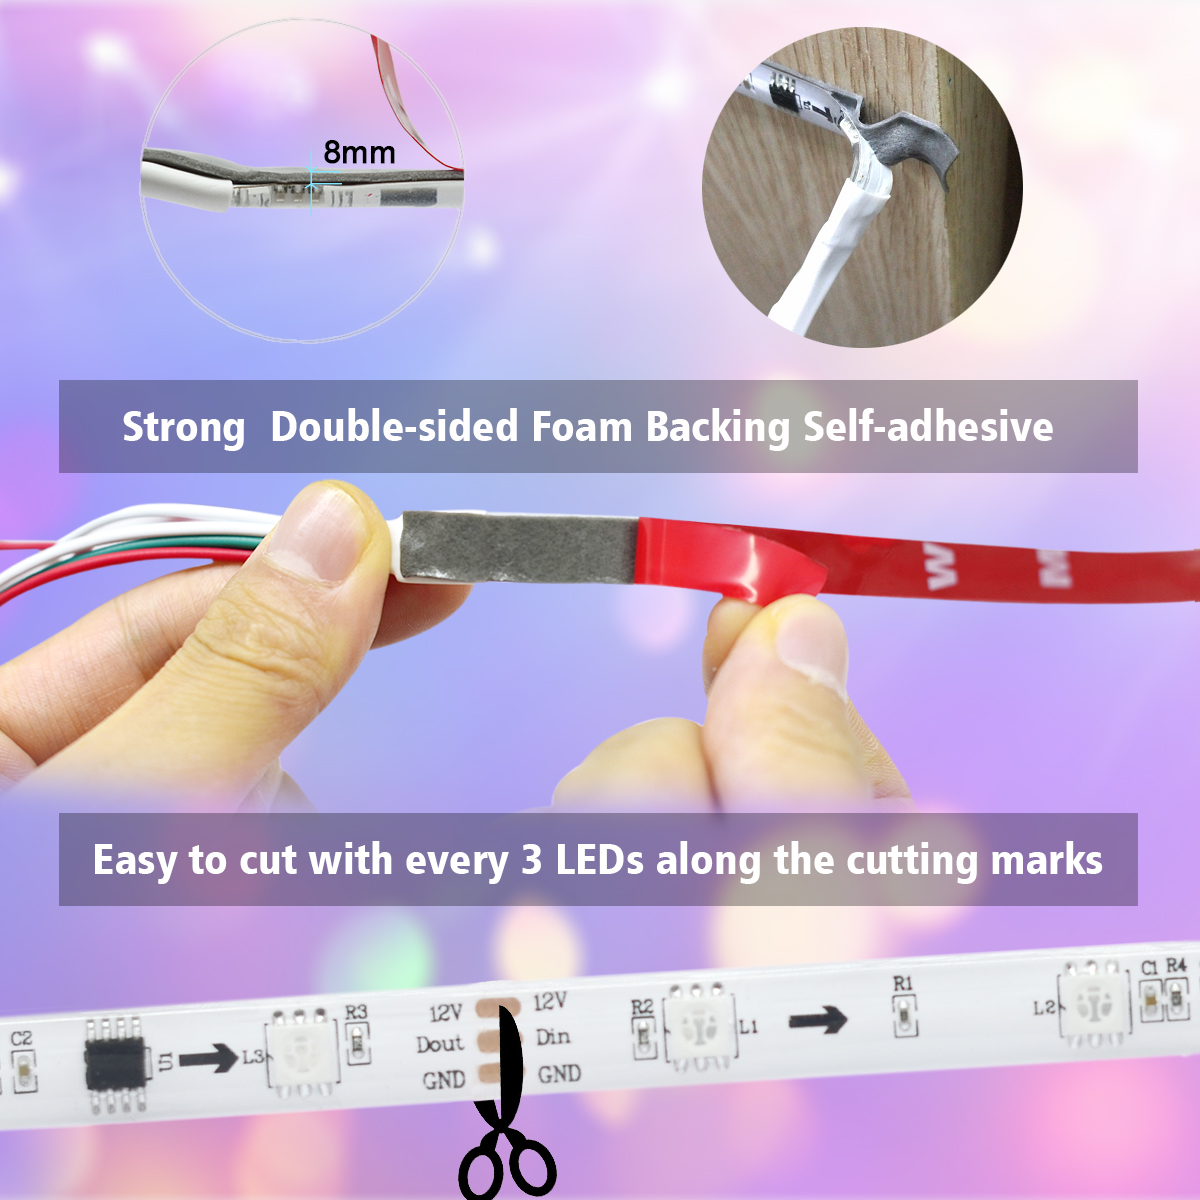 20 PCS 2-Pin 8mm Solderless LED Strip Connectors, Reliable and  Easy-to-Install, Solidly Connected LED Light Connectors